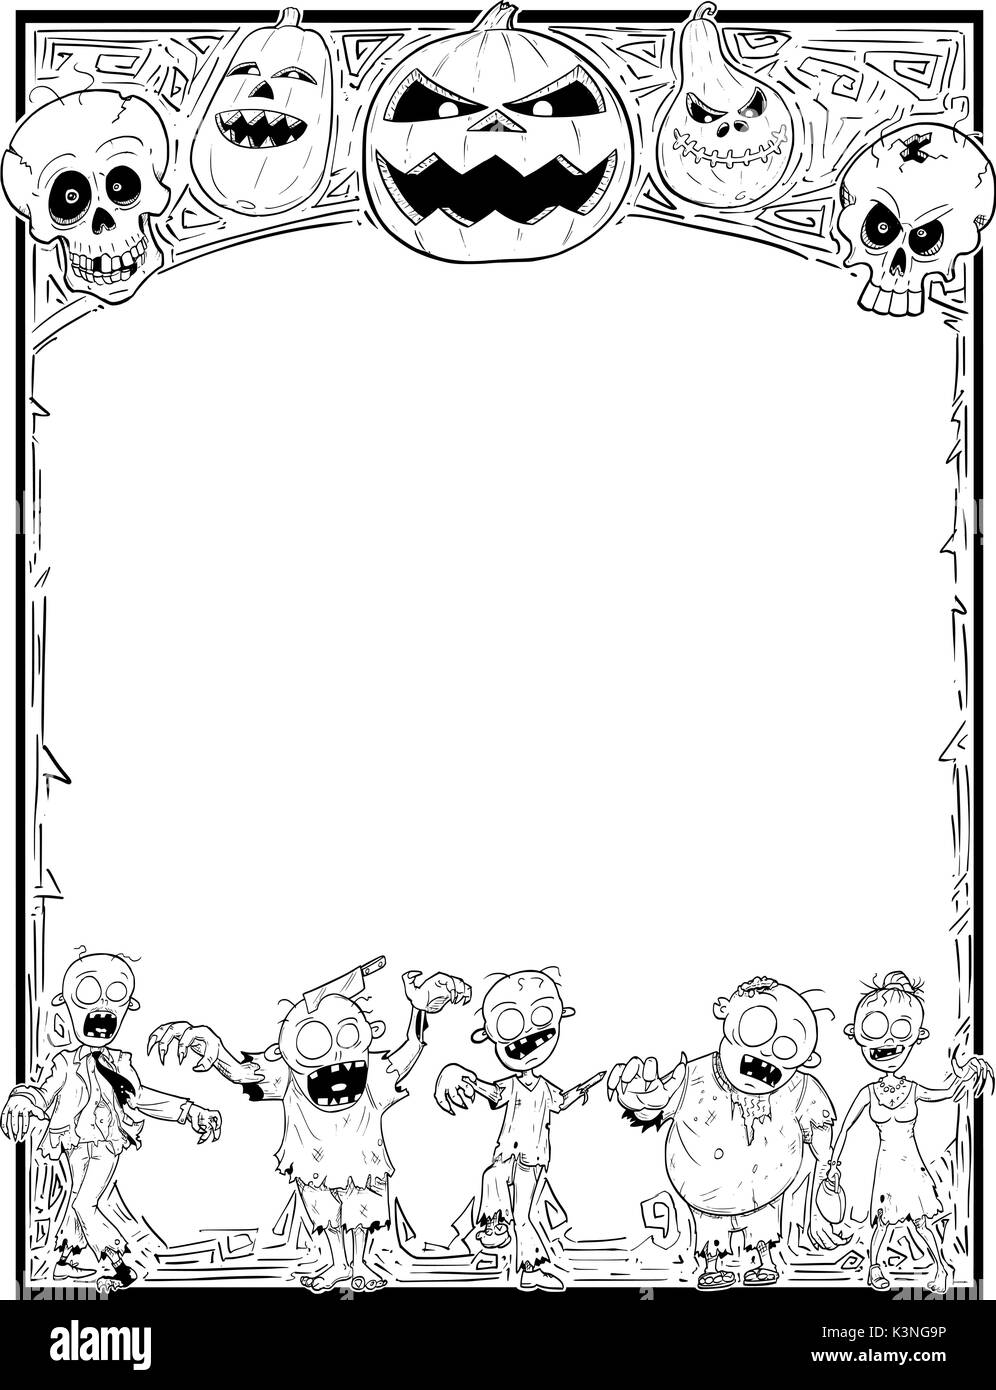 Hand drawing cartoon Halloween frame with cute zombie,skull and pumpkin illustrations. Stock Vector